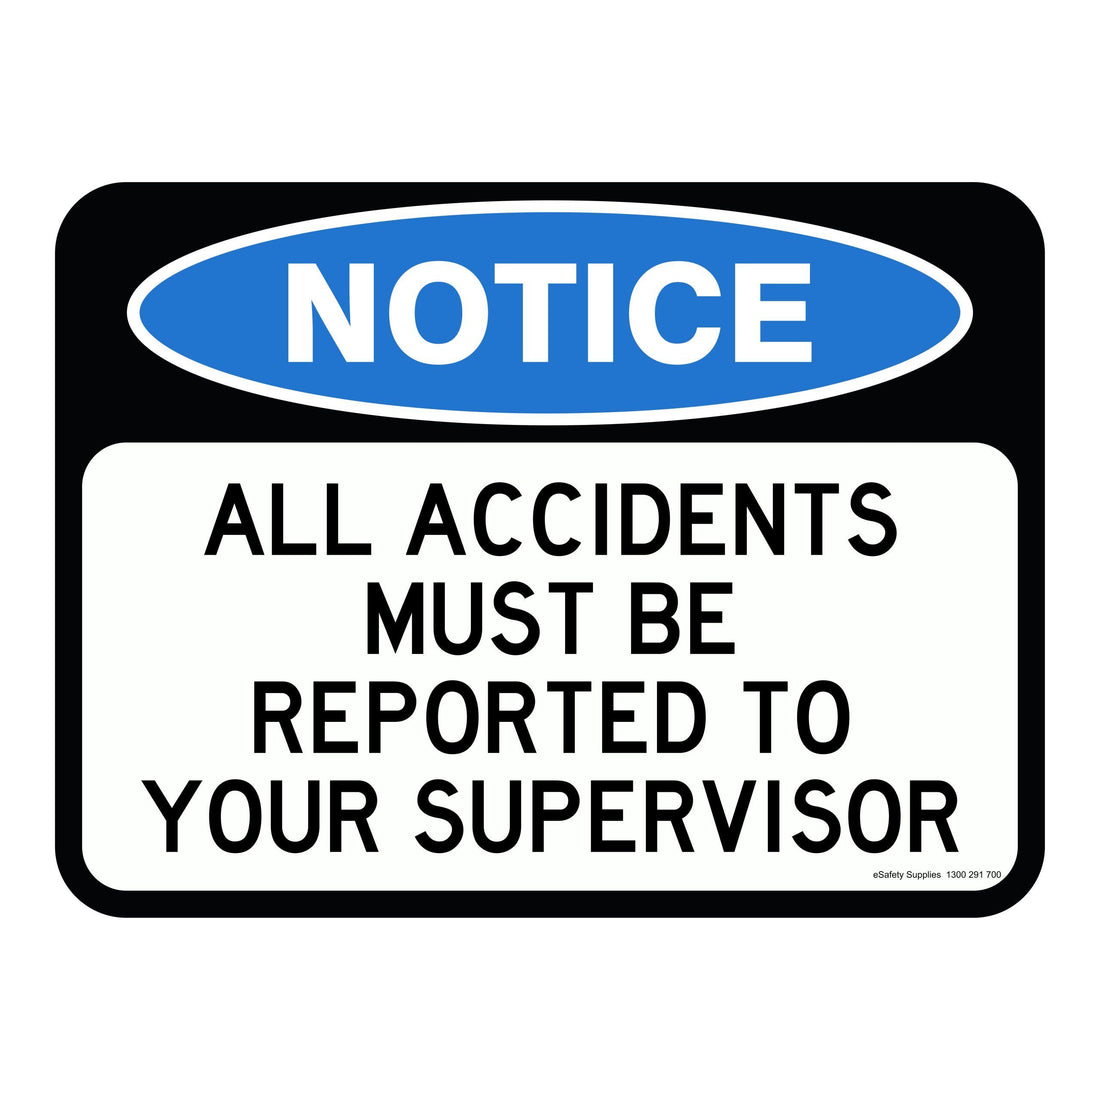 NOTICE - ALL ACCIDENTS MUST BE REPORTED TO YOUR SUPERVISOR